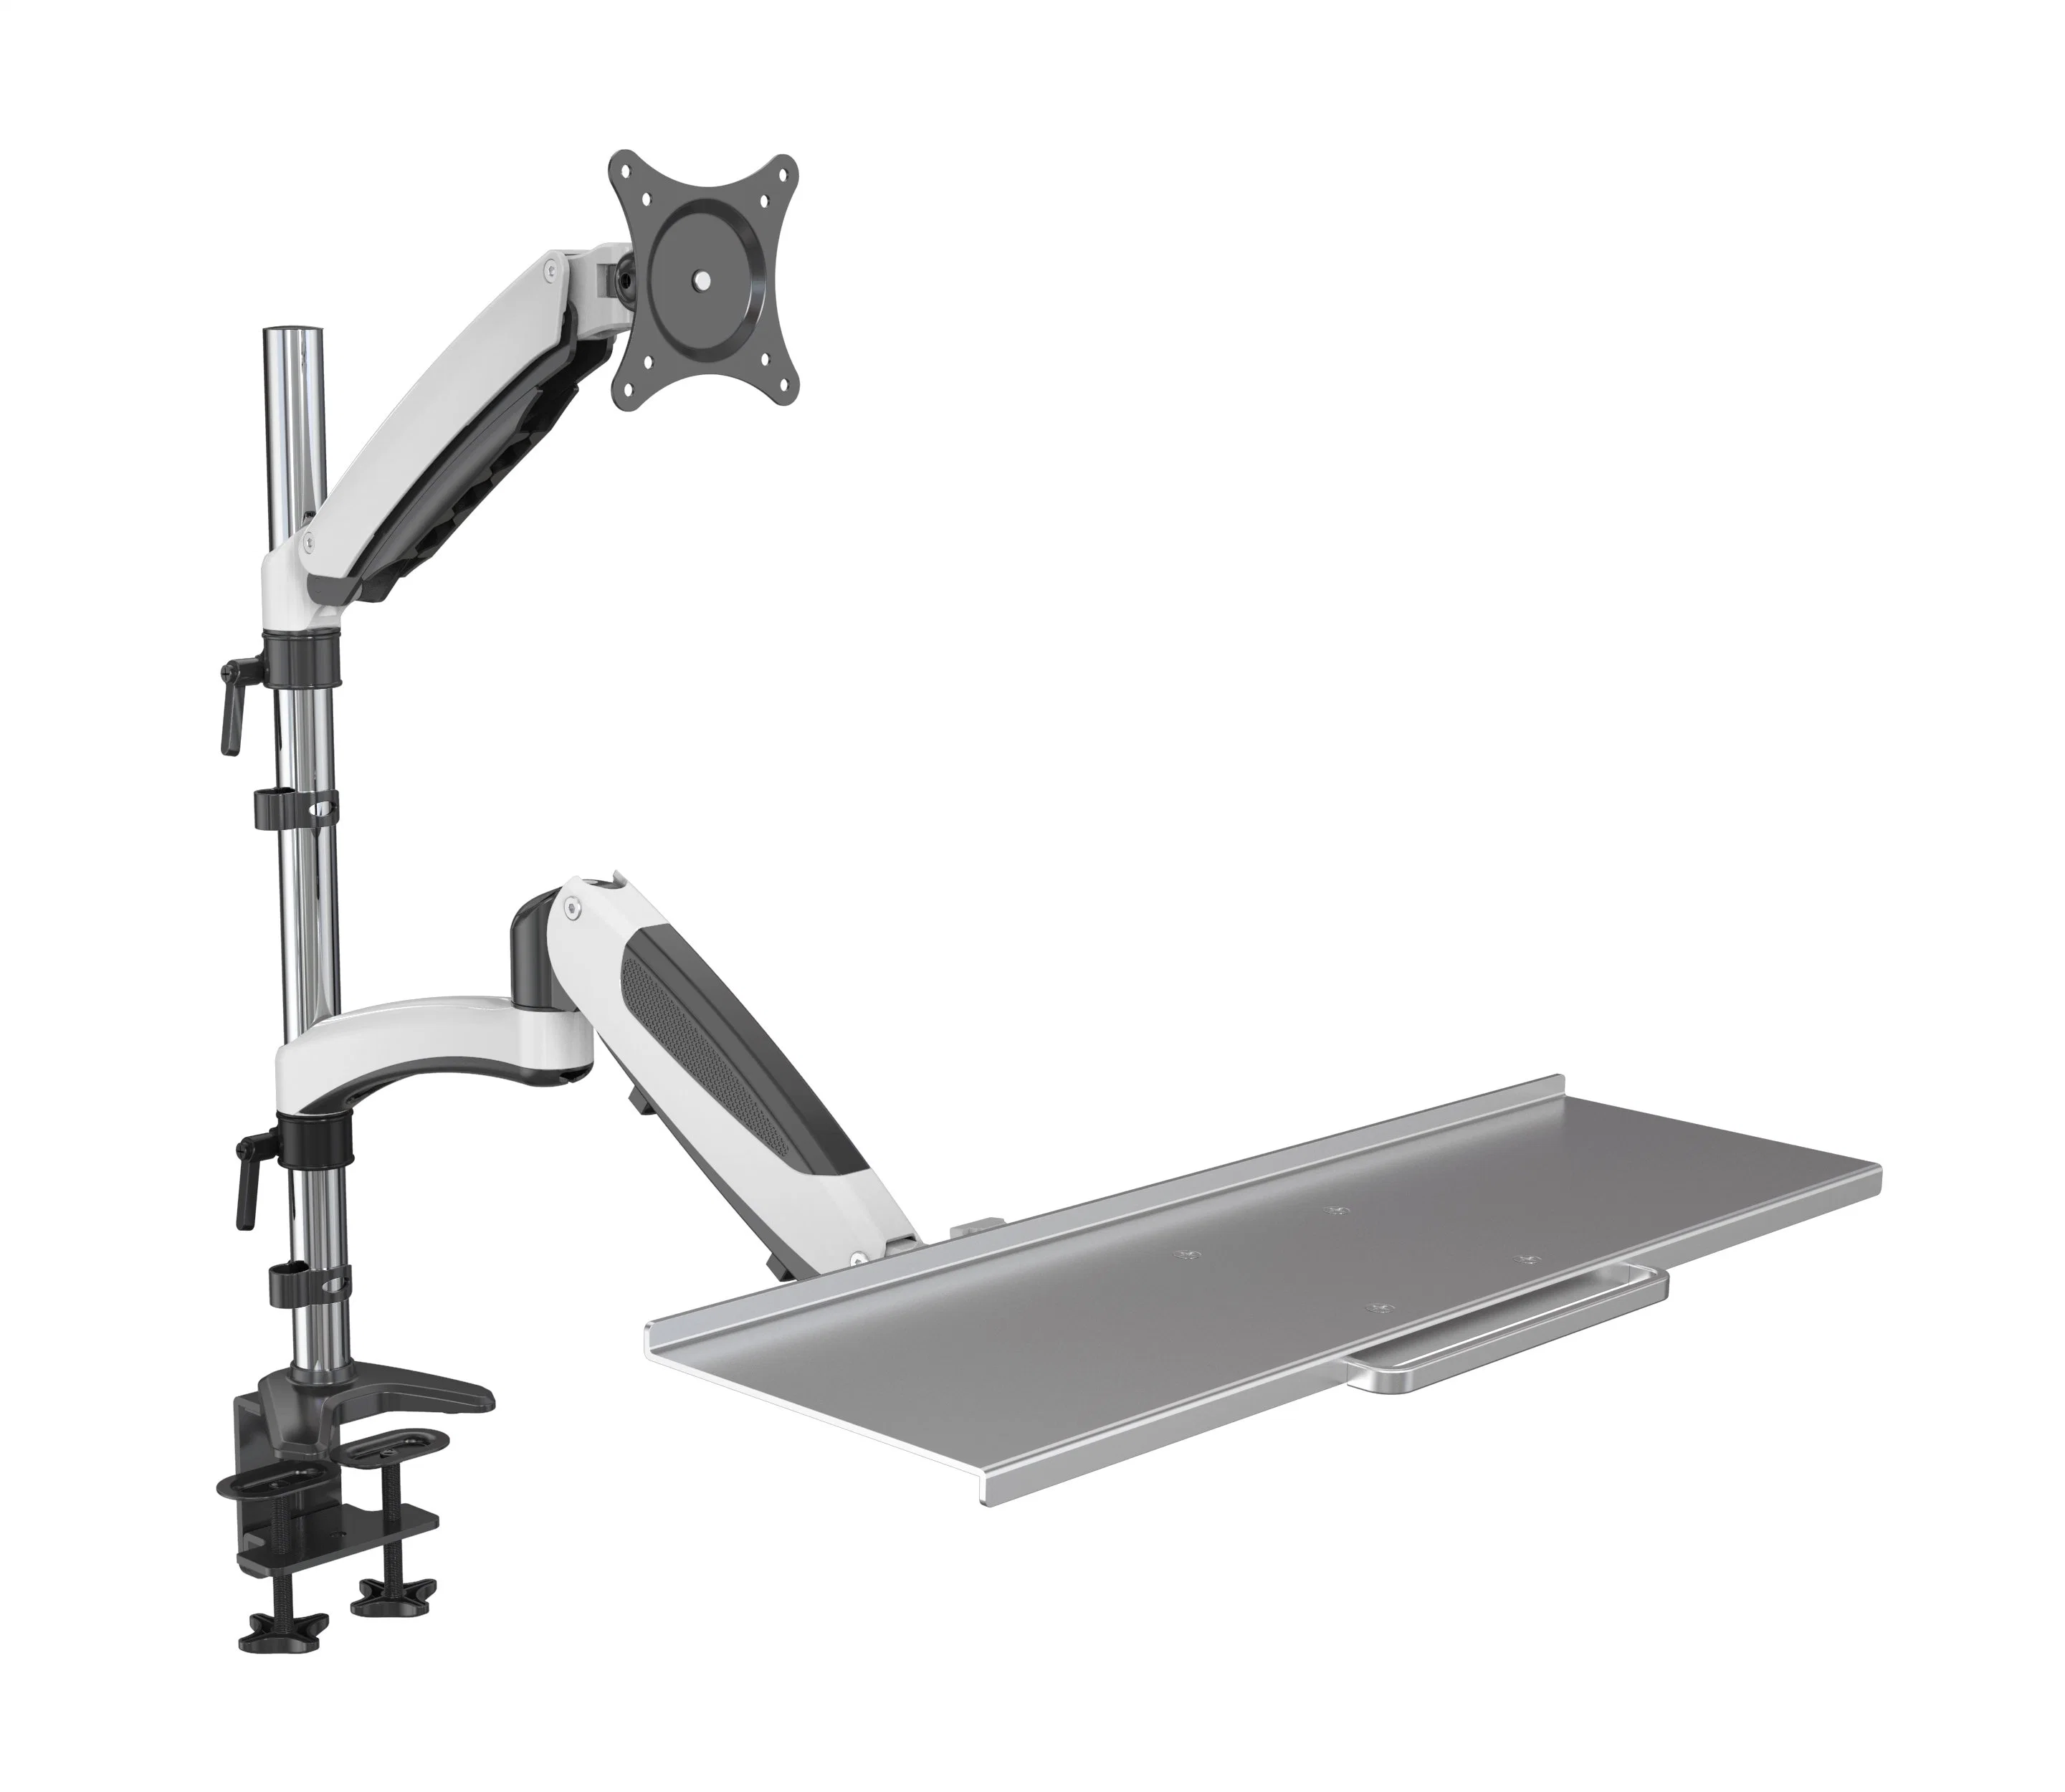 V-Mounts Single Monitor Gas Spring Height Adjustable Mount Arm for Desk with Keyboard Tray Vm-Ws01